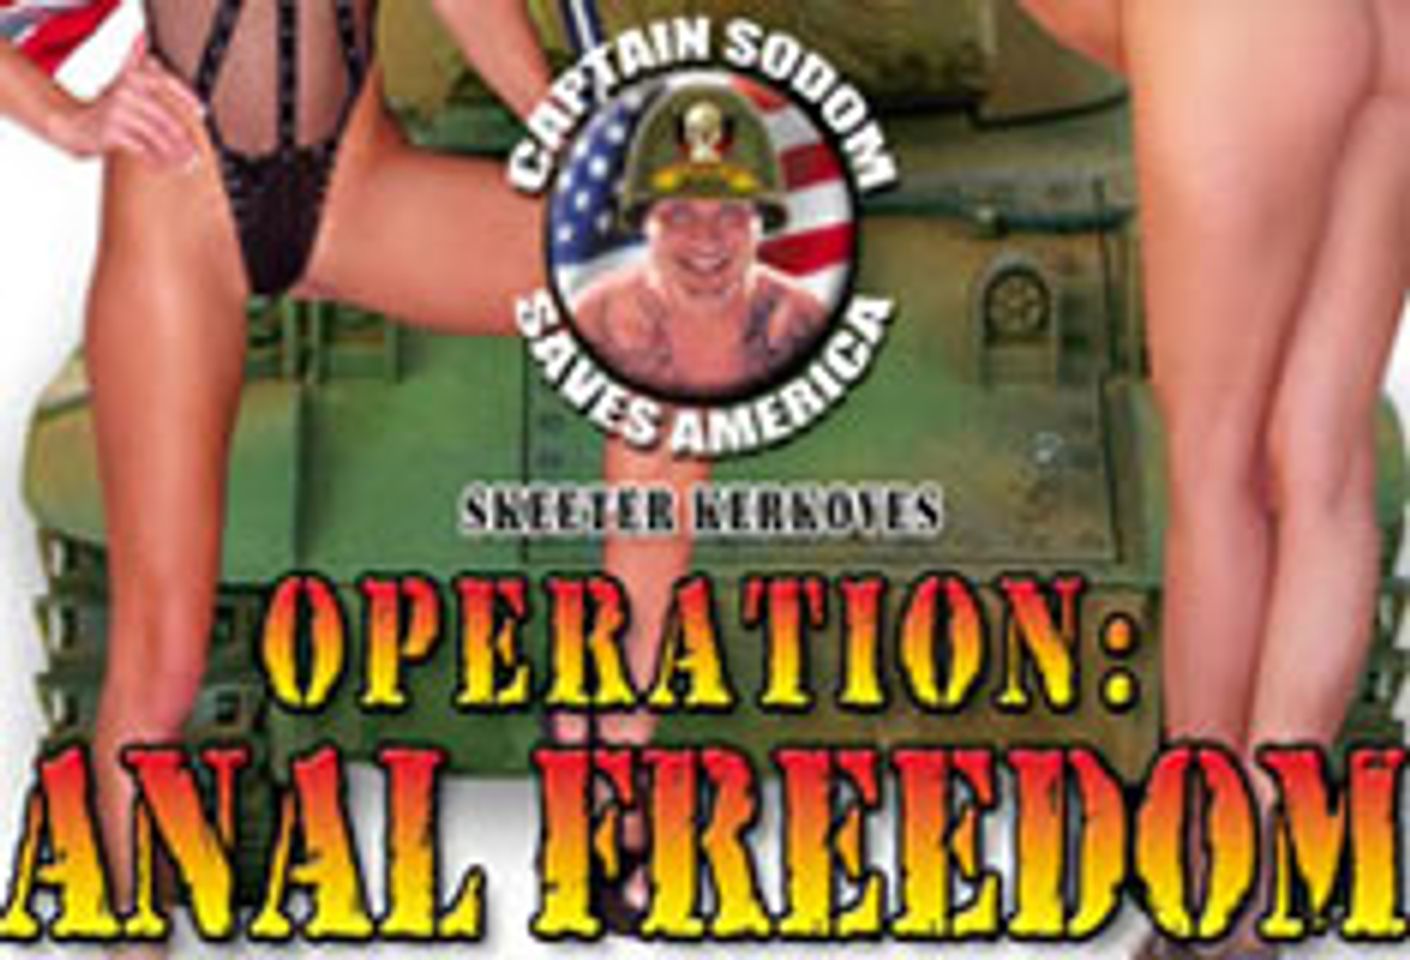 Skeeter Kerkove Strikes a Blow for Anal Freedom